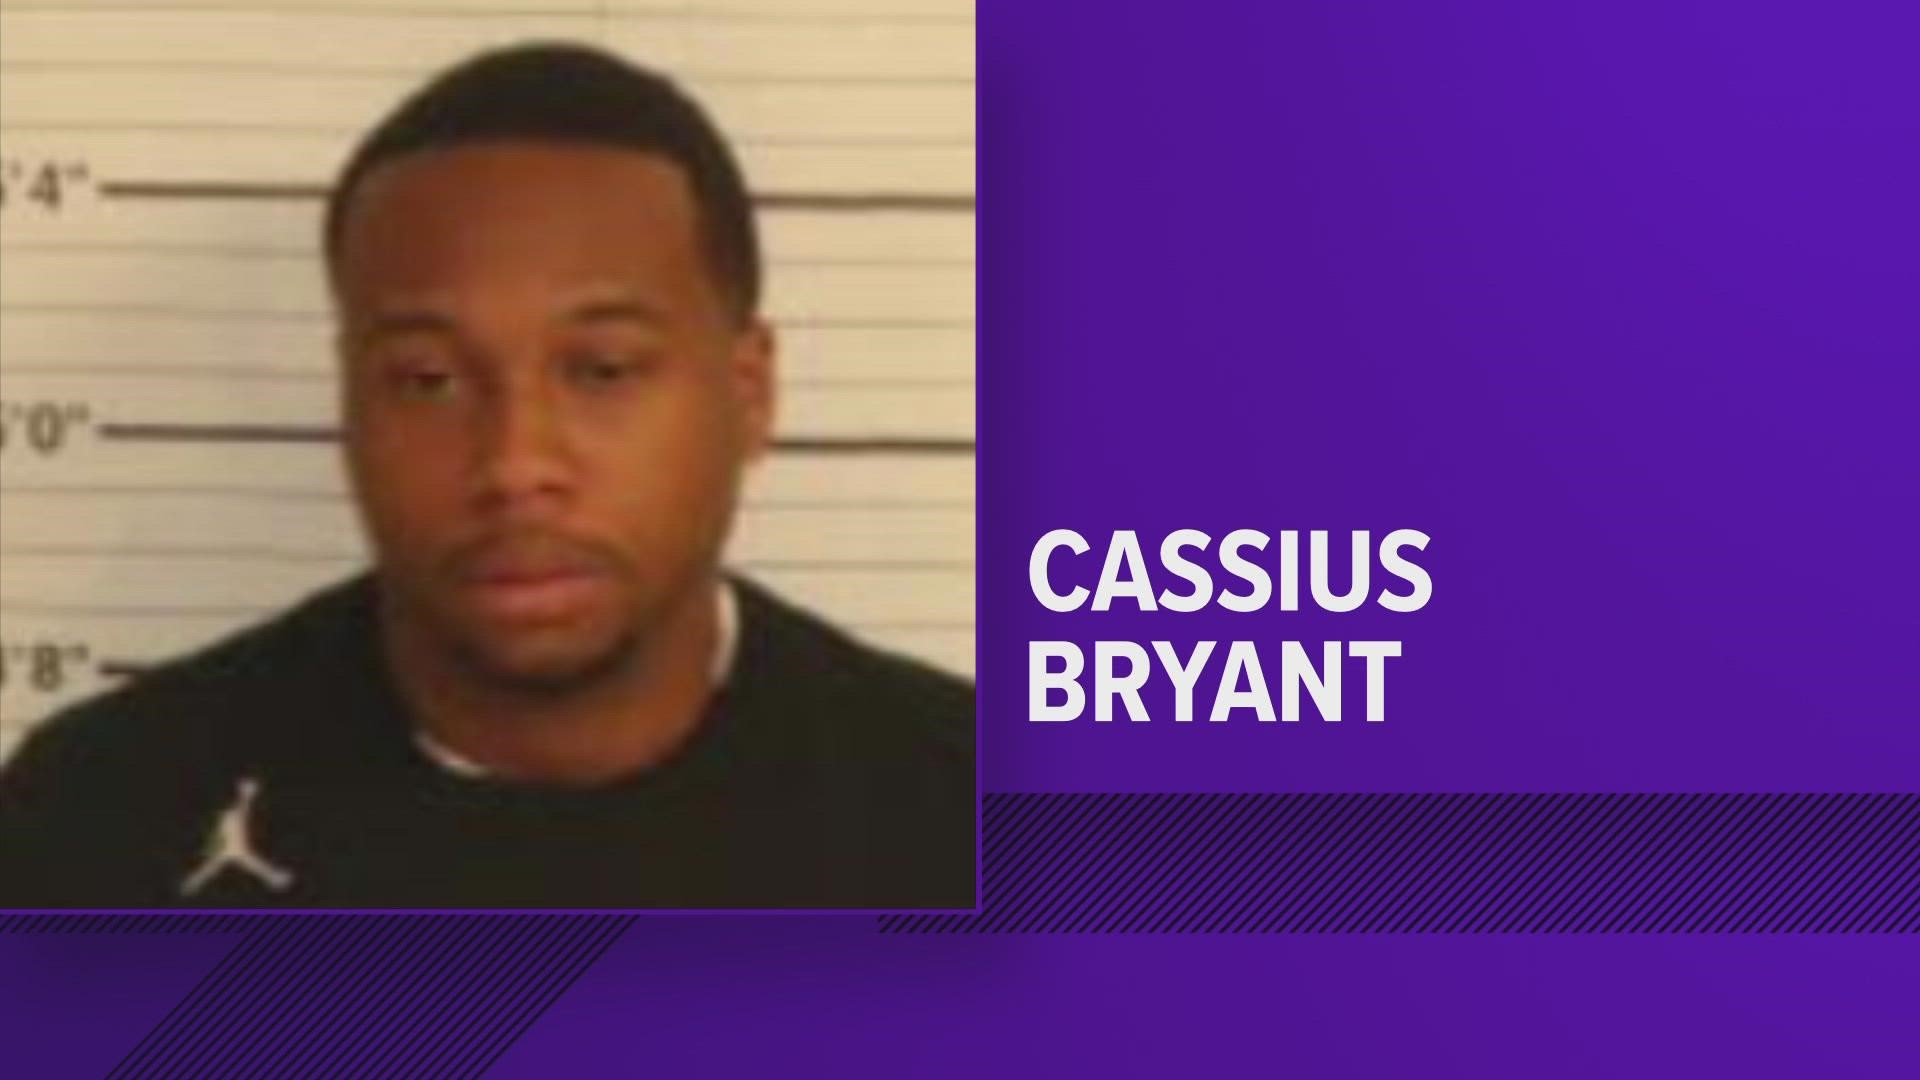 Cassius Bryant was arrested January 16. He was charged with two counts of first-degree murder, aggravated robbery, tampering with evidence, and false offense report.